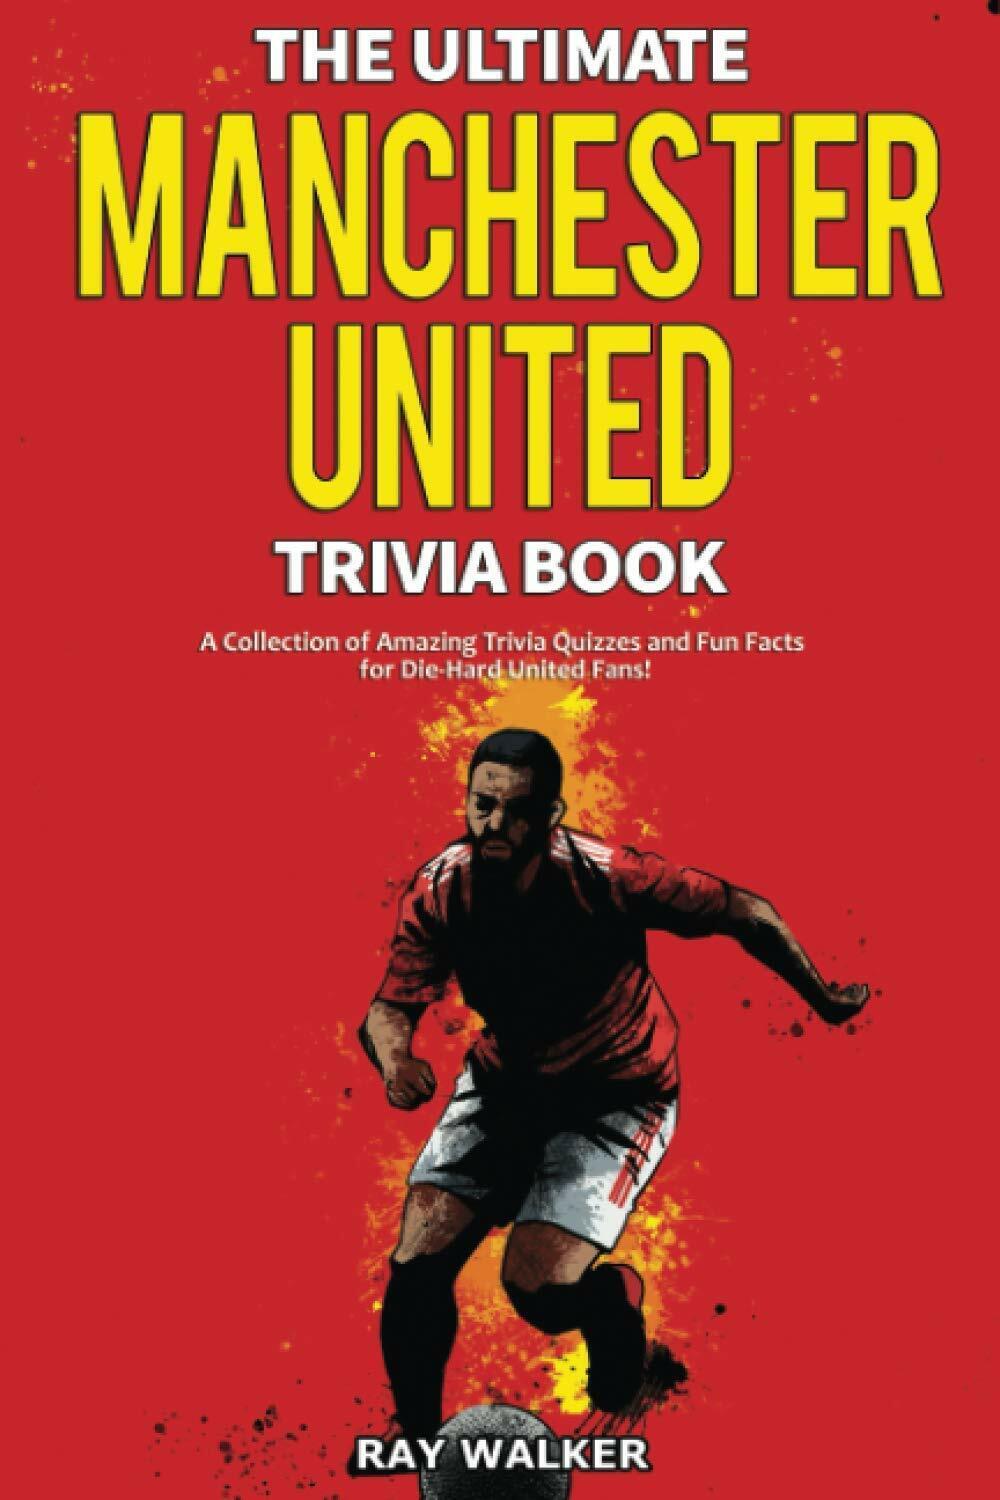 The Ultimate Manchester United Trivia Book - Ray Walker - HRP House, 2020 libro usato